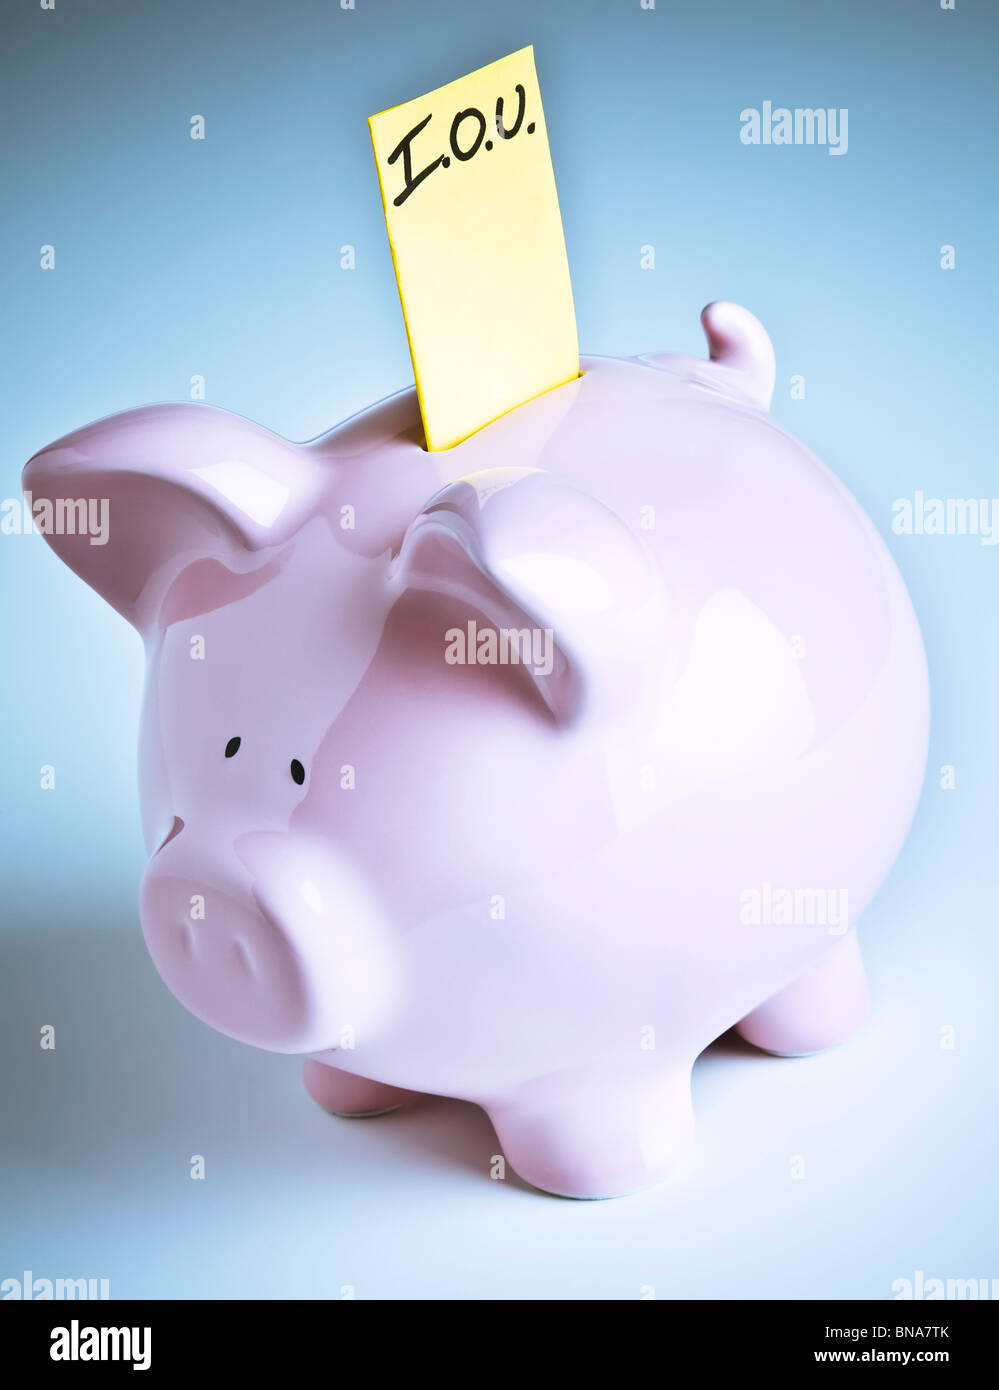 Piggy bank with IOU sticking out of its coin slot. Stock Photo